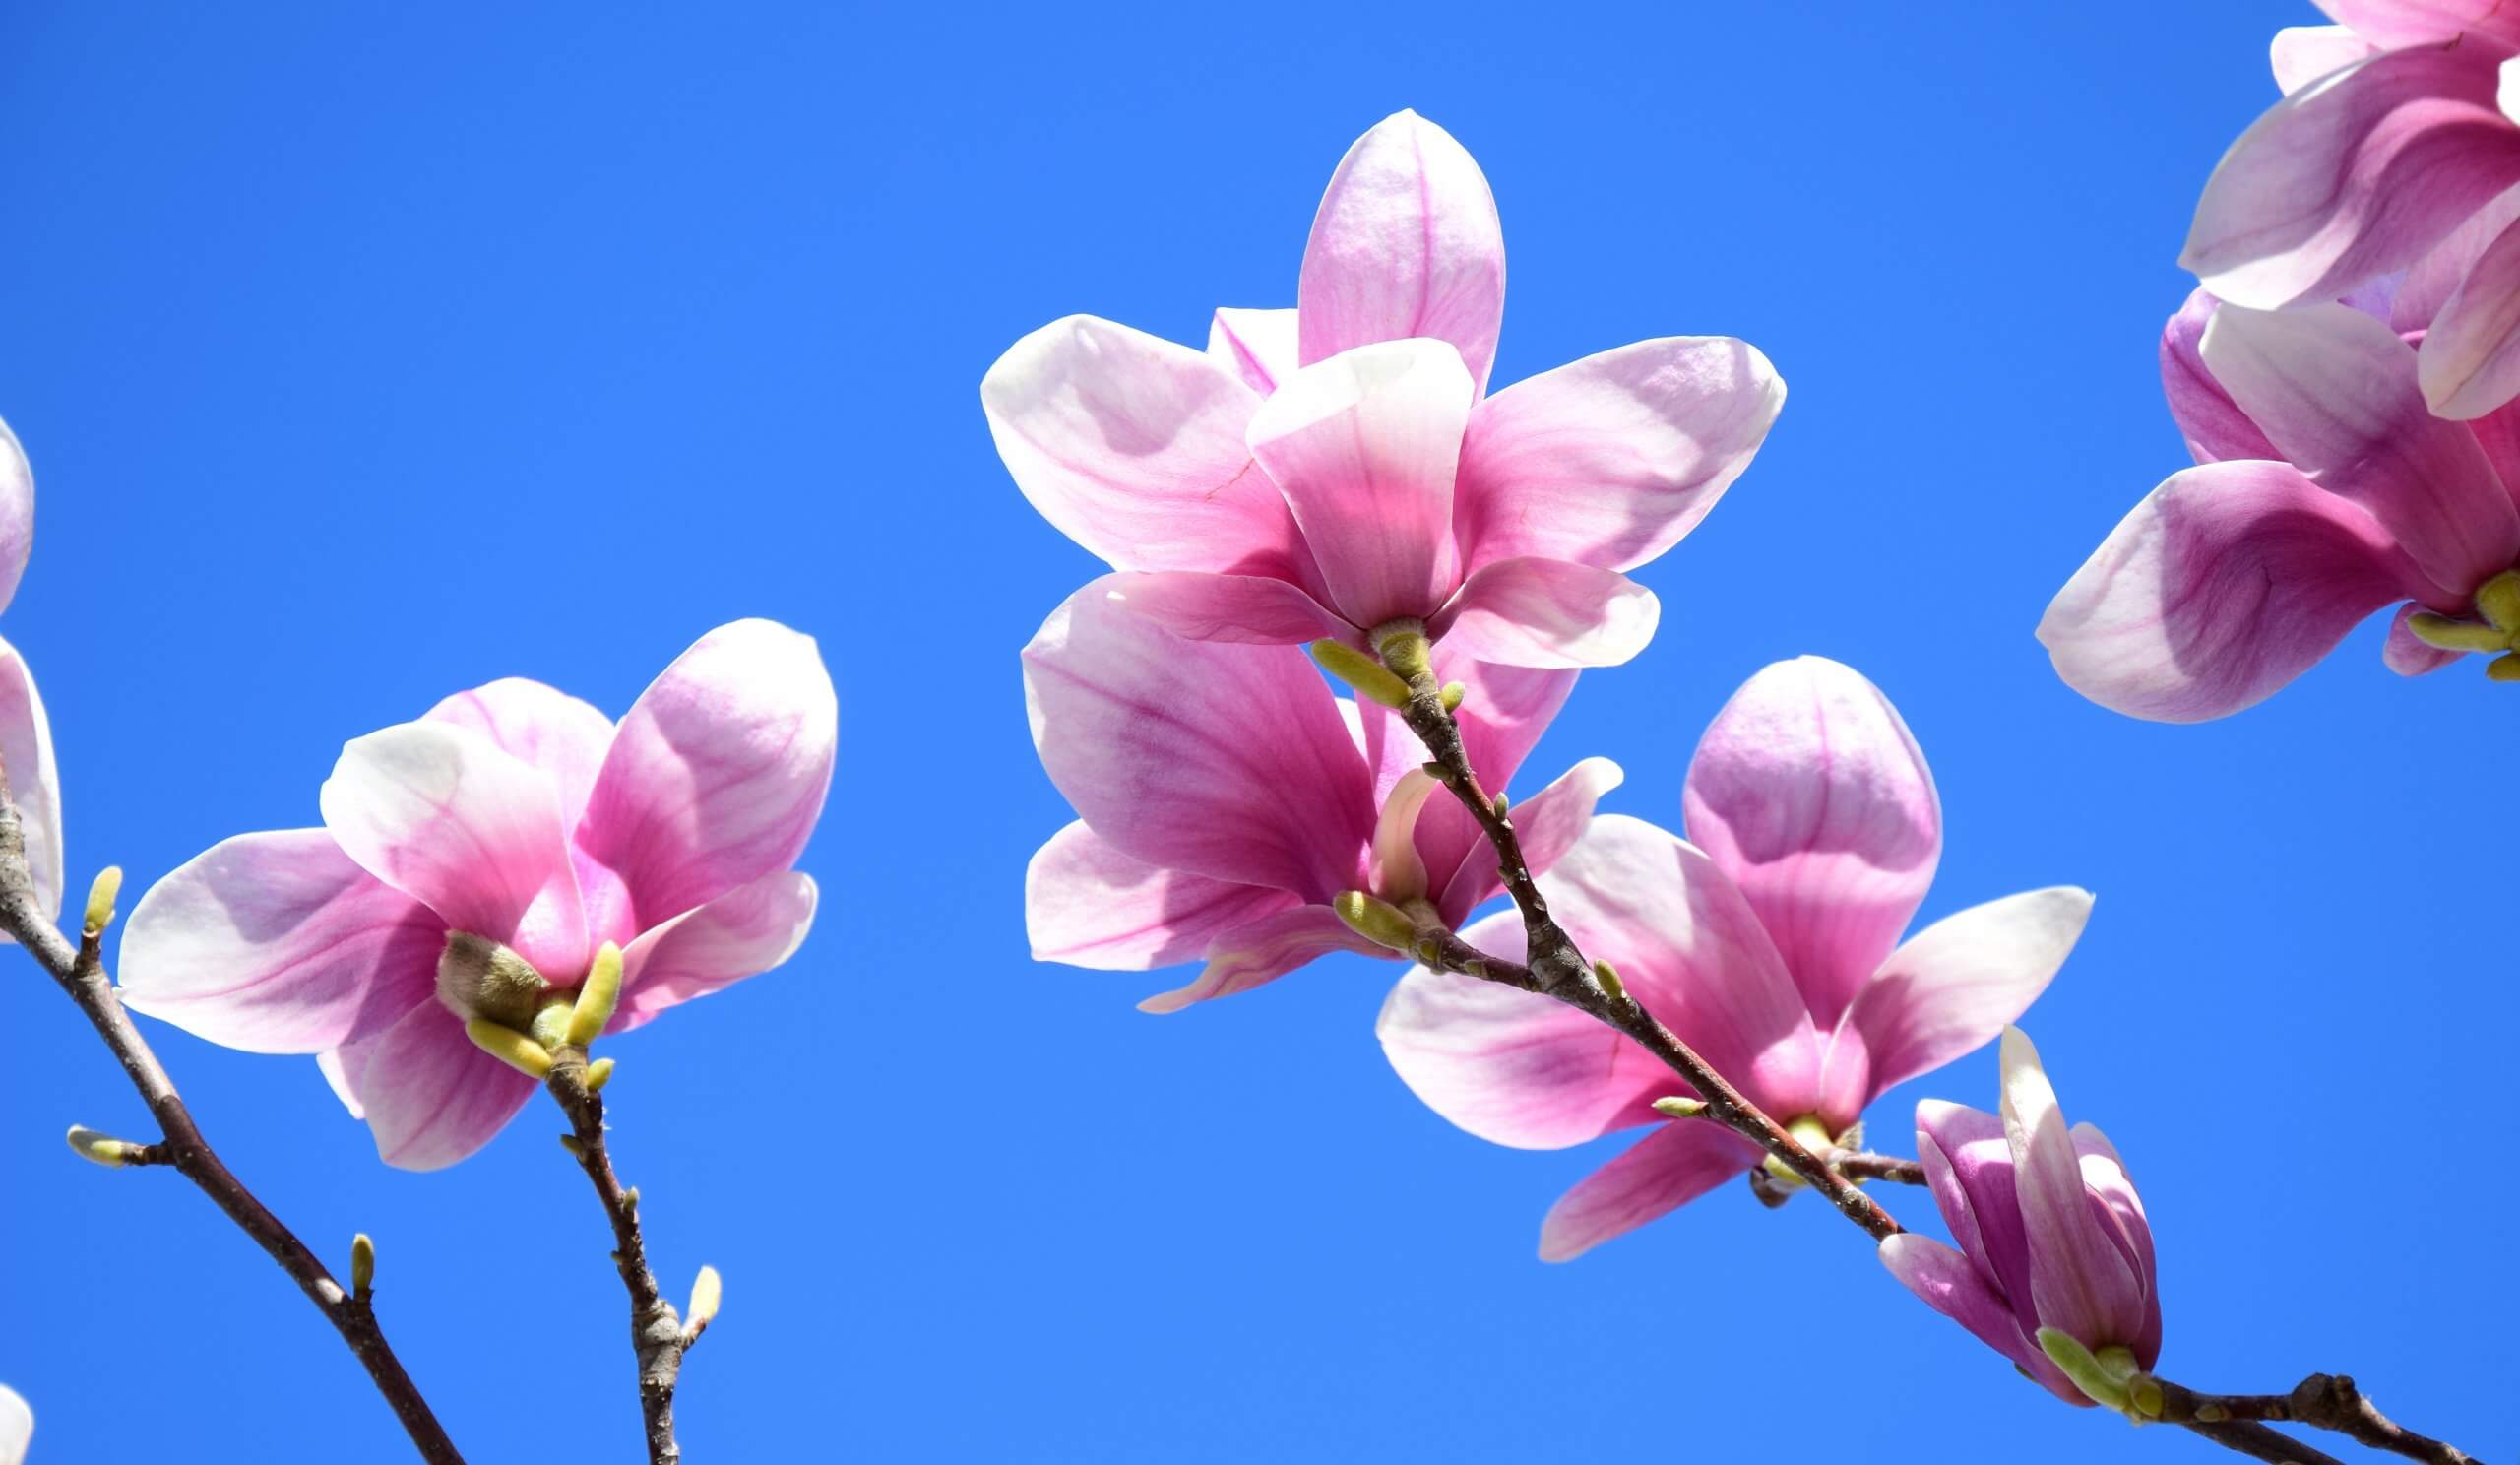 Magnolia,Flowers,Of,A,Magnolia,Tree,In,Spring